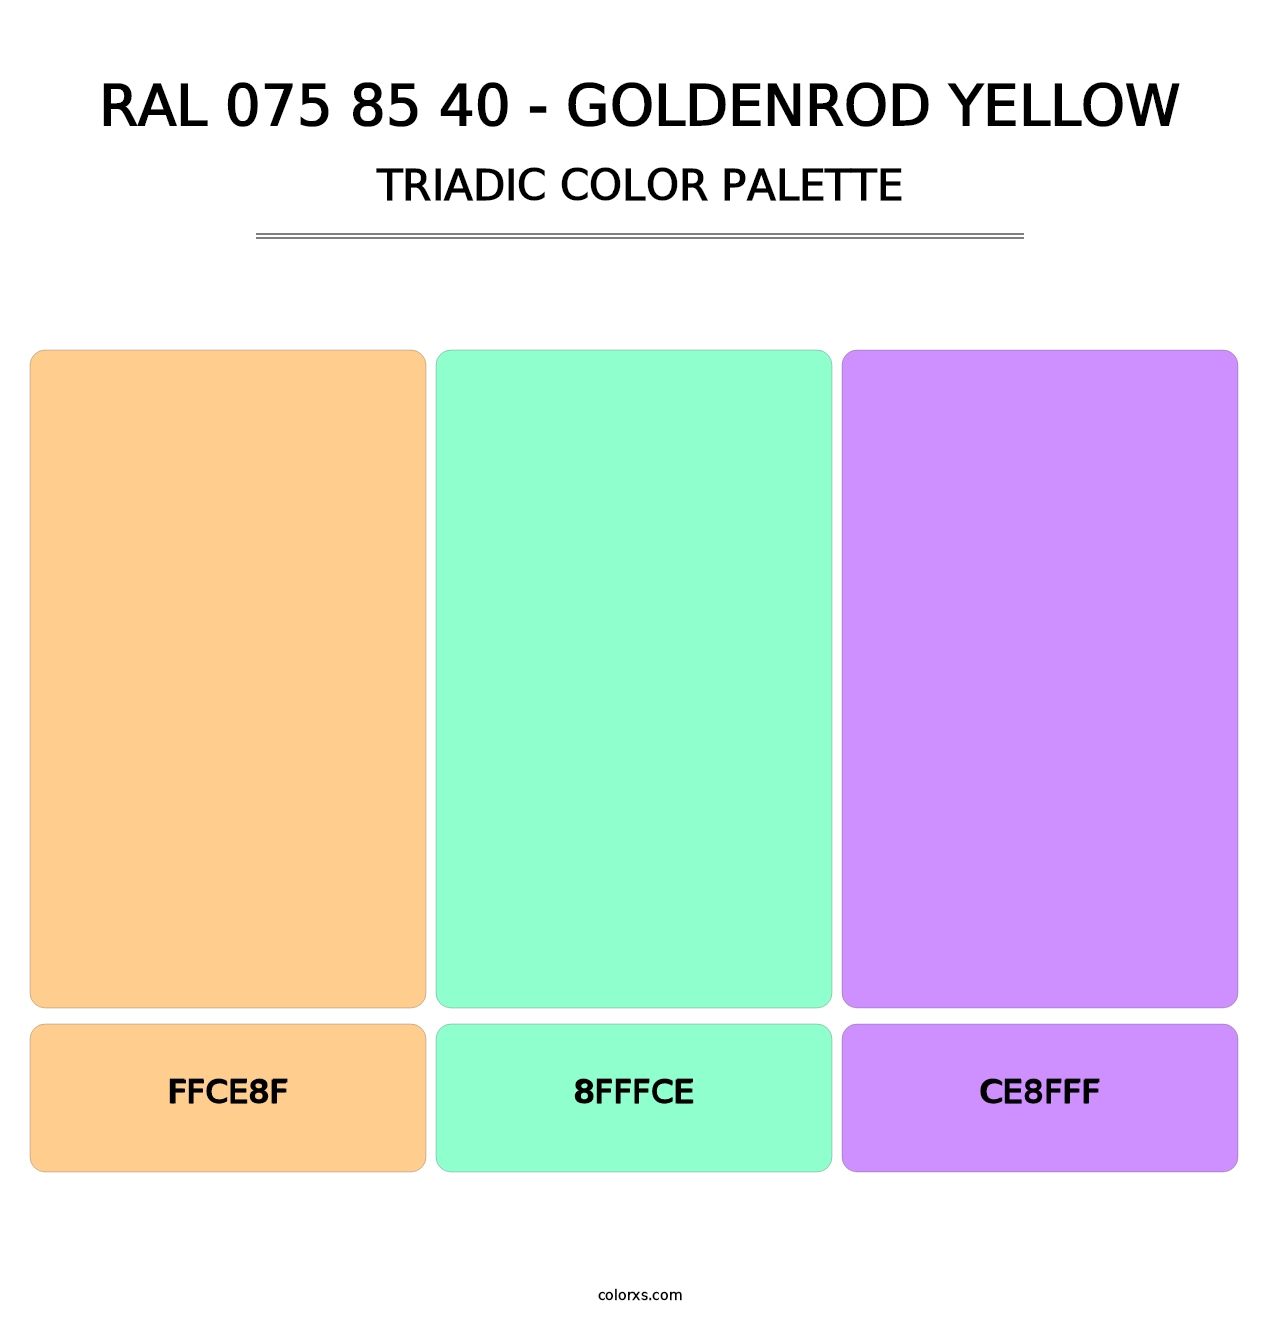 RAL 075 85 40 - Goldenrod Yellow - Triadic Color Palette